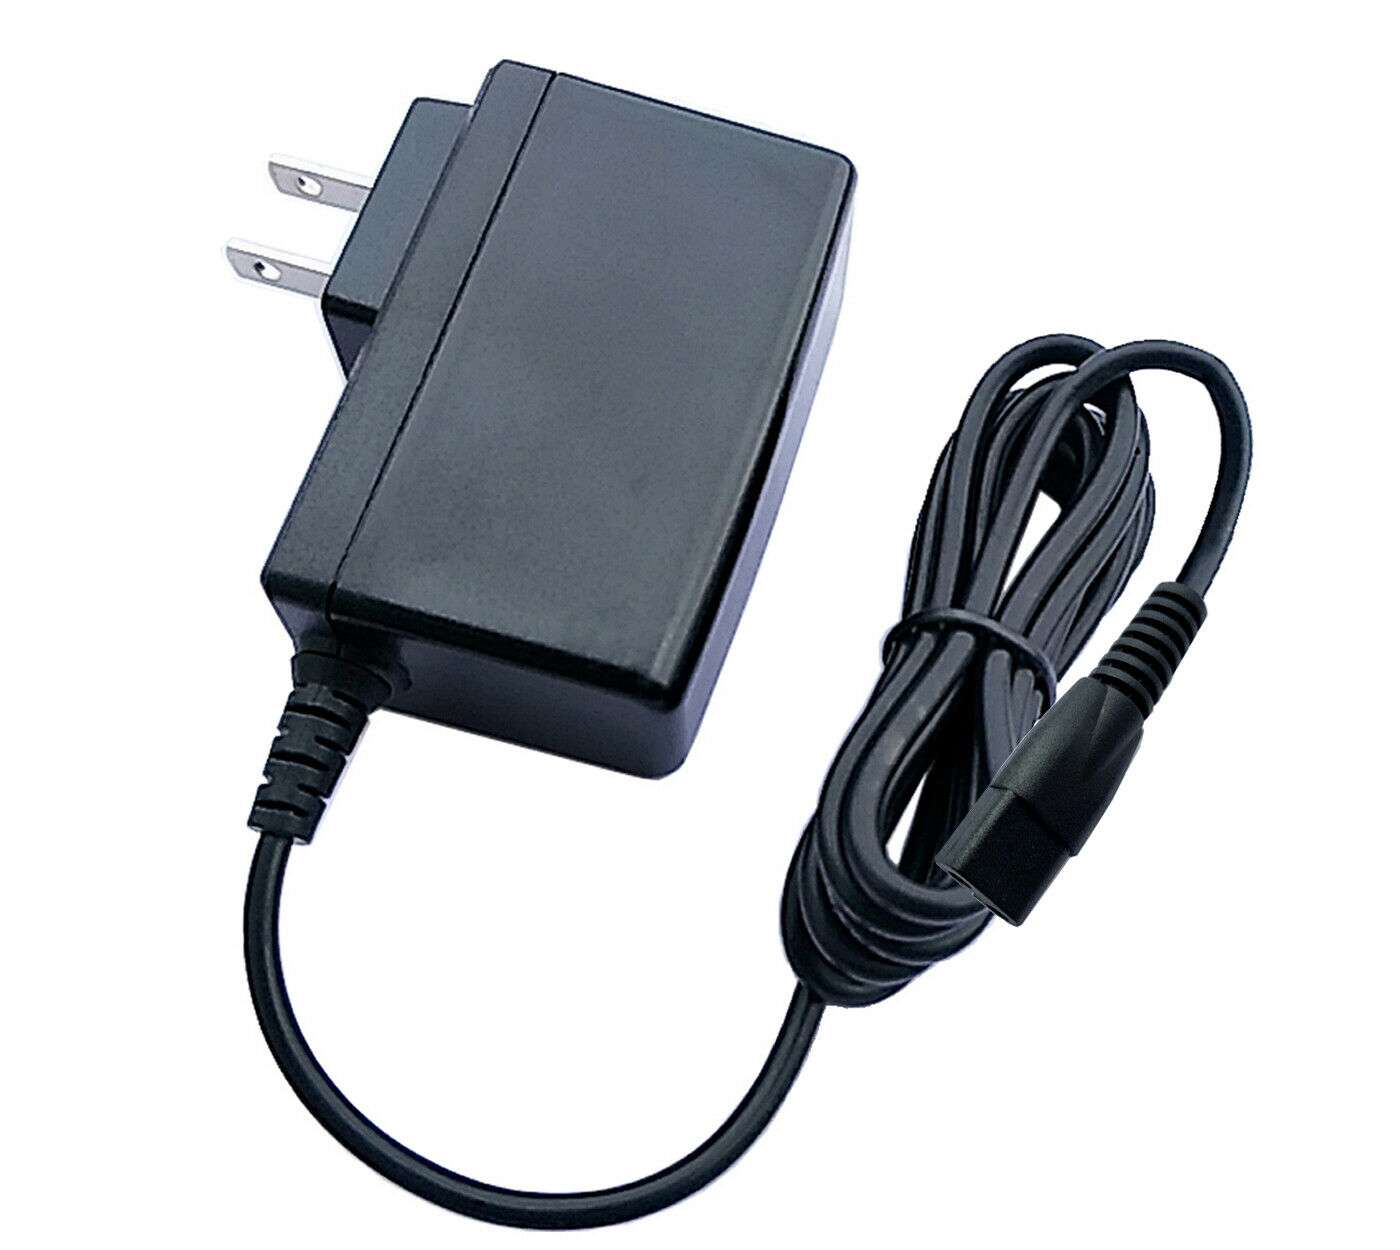 AC Adapter Charger For Tascam PS-M1524 MZ-223 MZ-372 Industrial Grade Zone Mixer Features and Specification: Worldwide